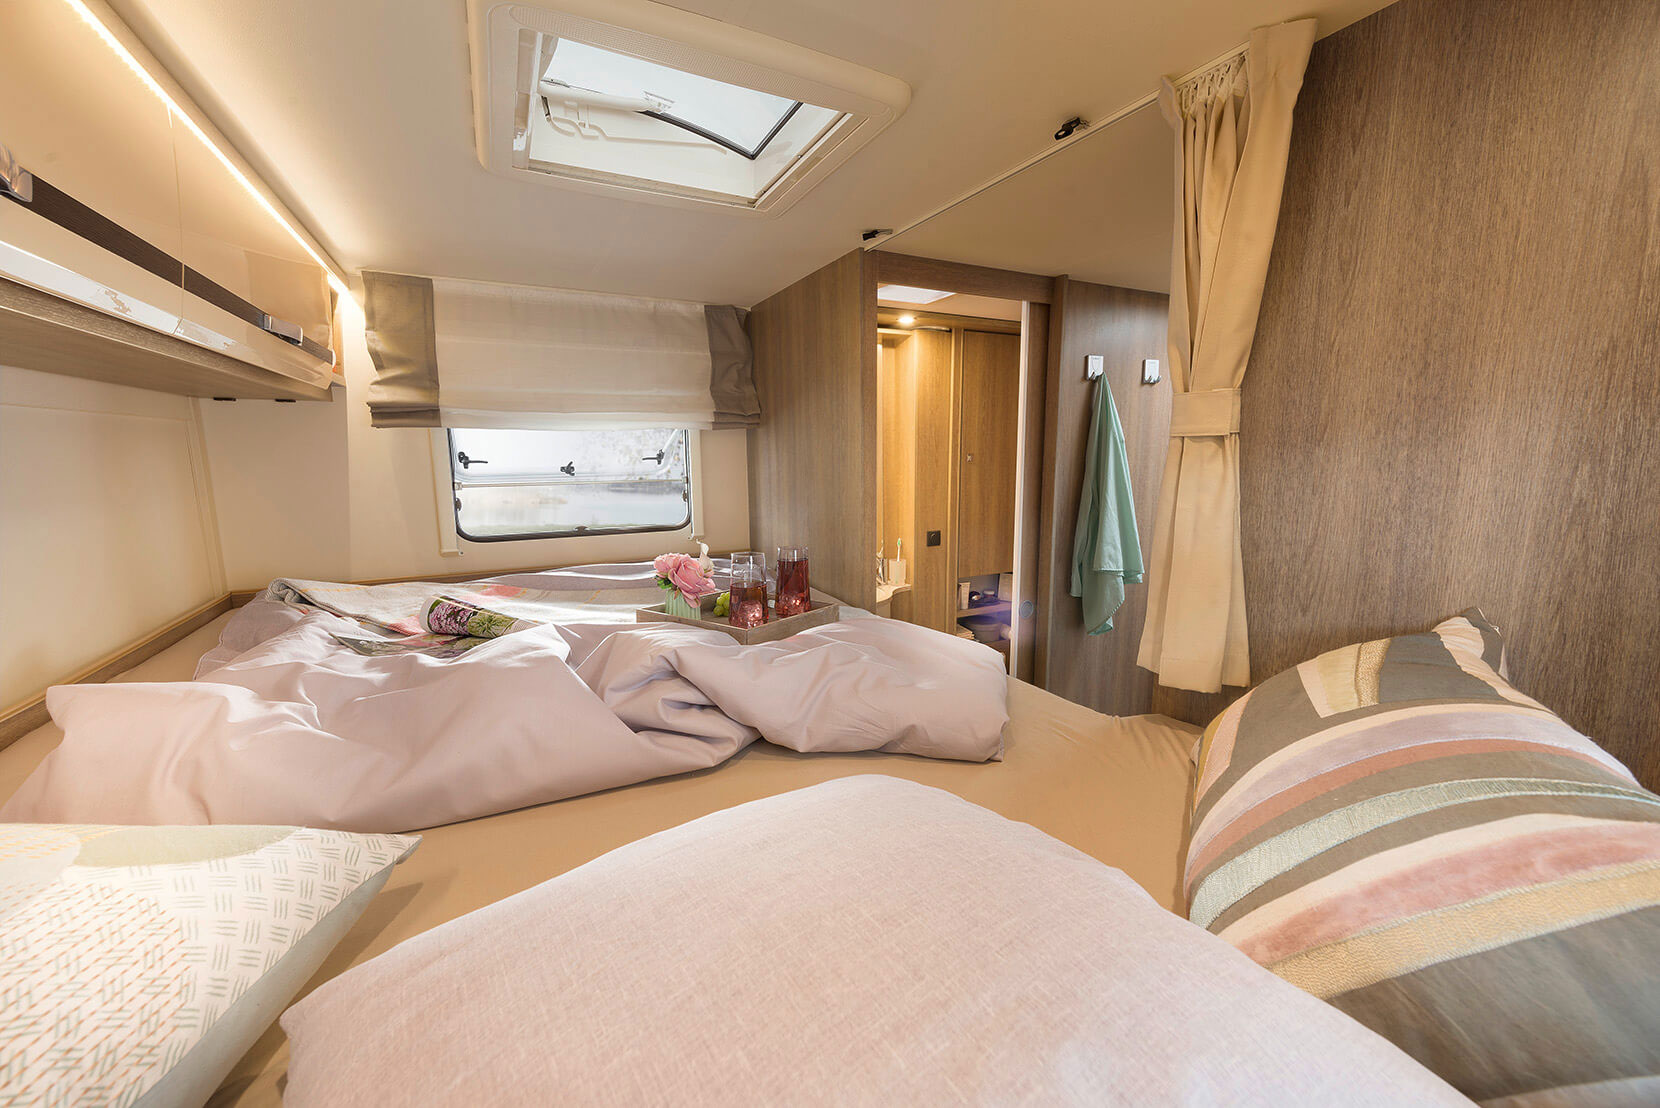 Enough space for cosy relaxation: rear bed with plenty of headroom and a 210 x 150/140 cm sleeping area • A 6977